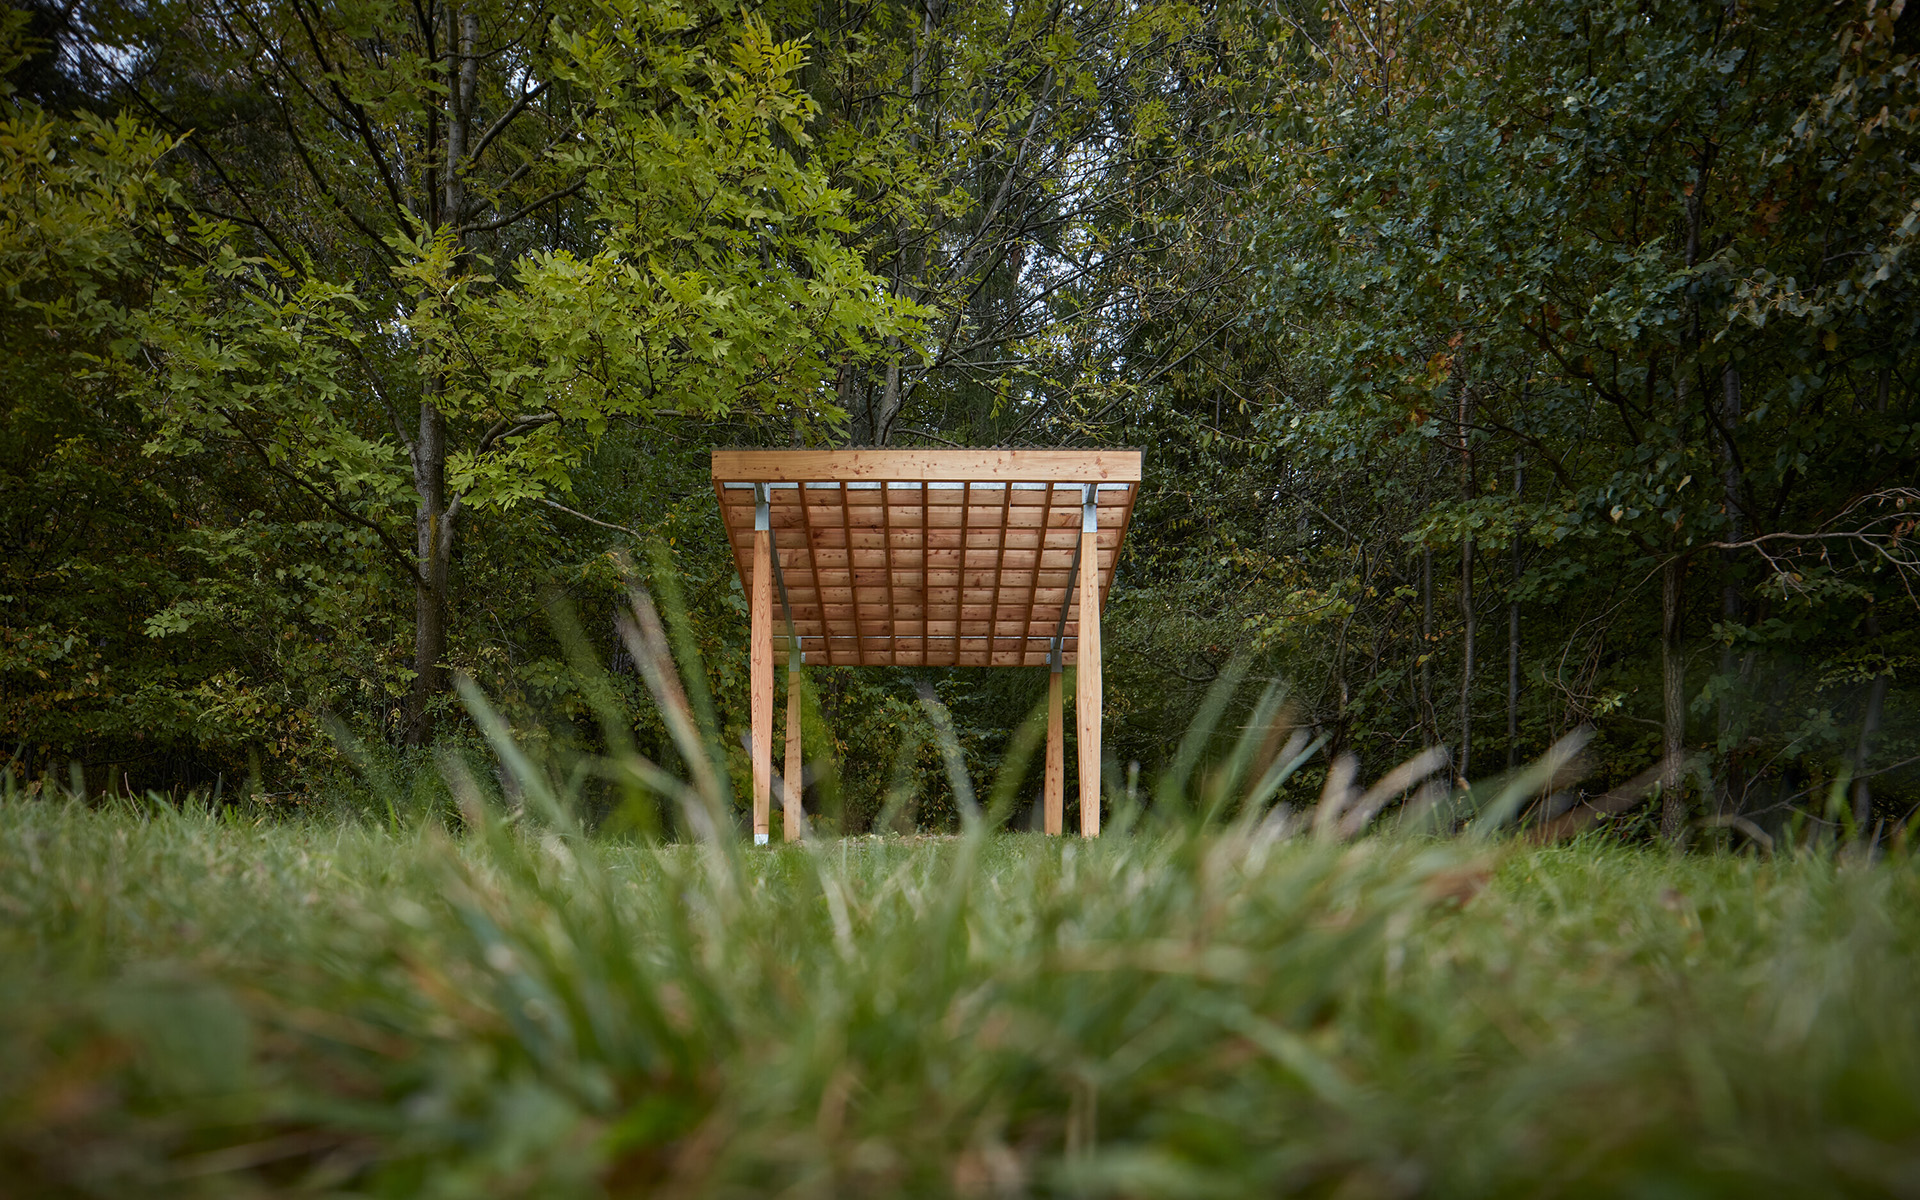 Wooden outdoor furniture promotes healthy living and in harmony: the Yogapoints